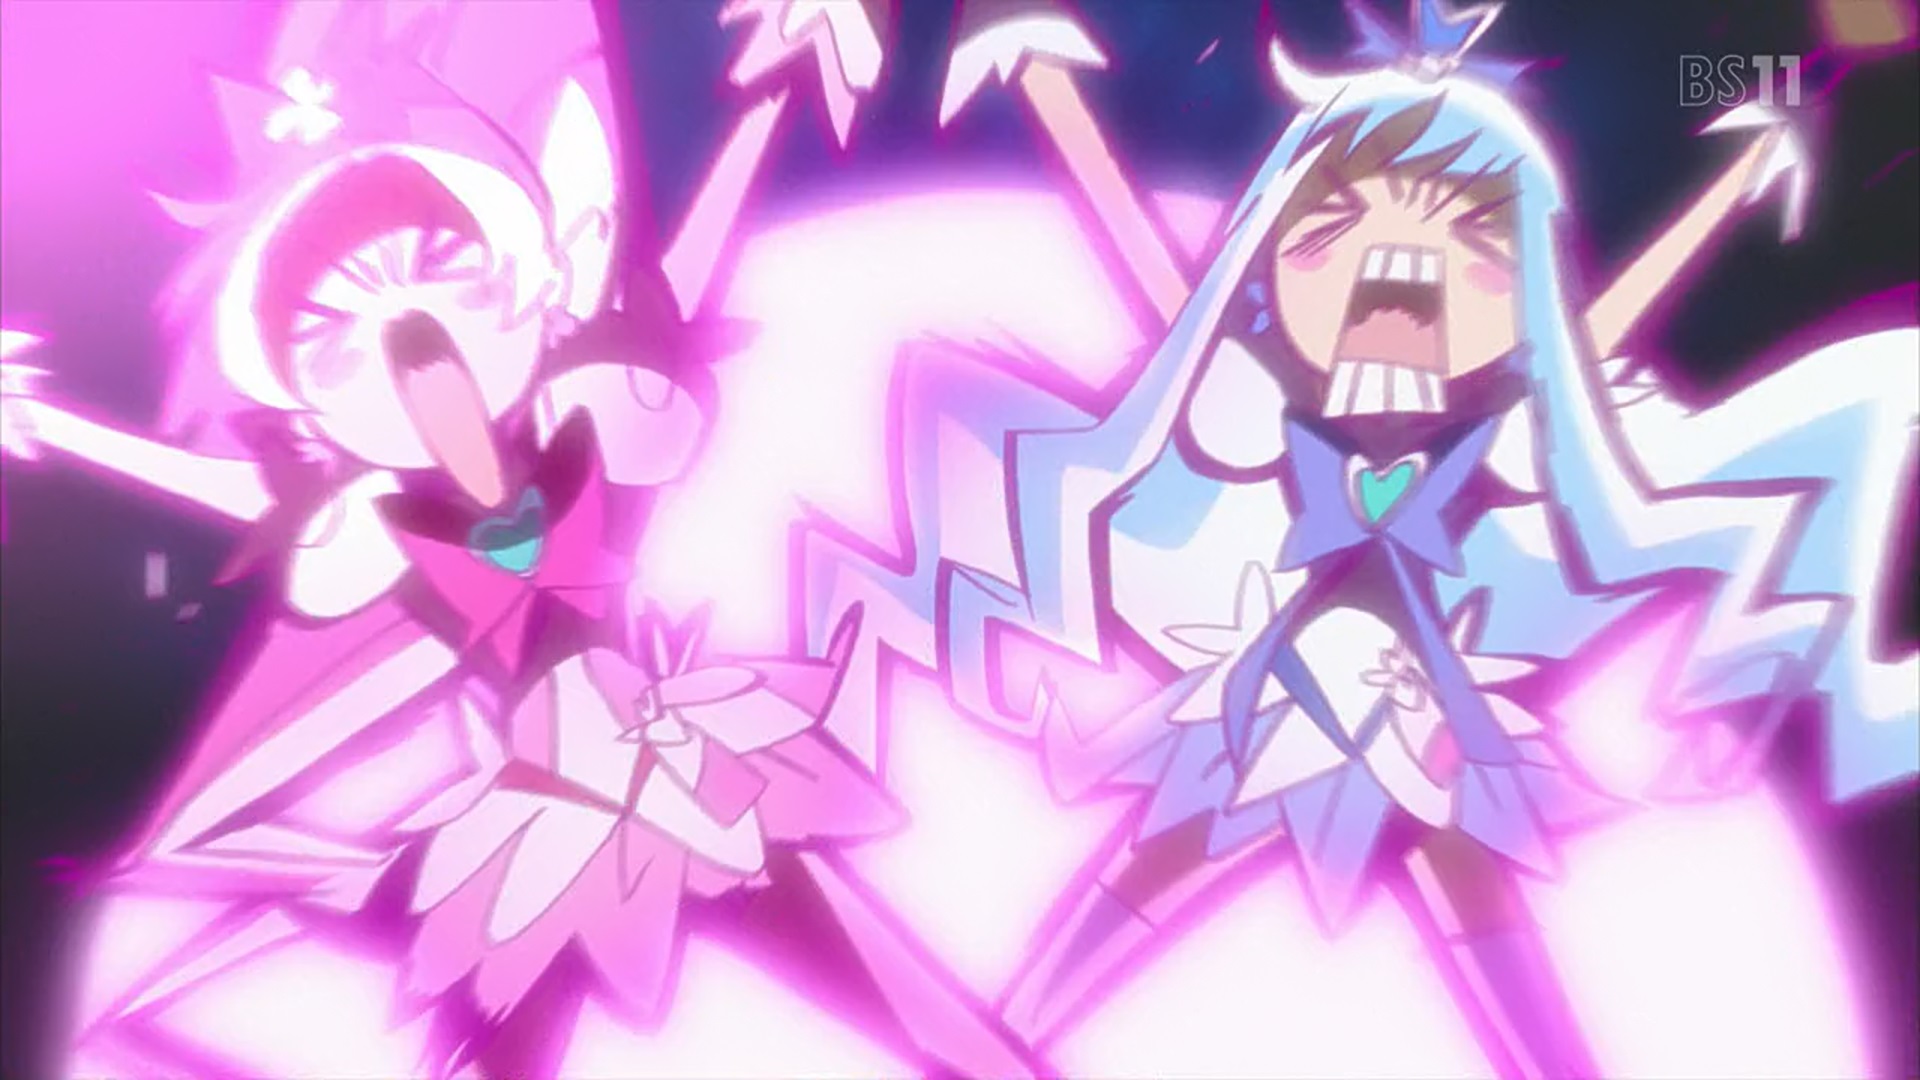 Precure Has Done it Again, New Anime Series